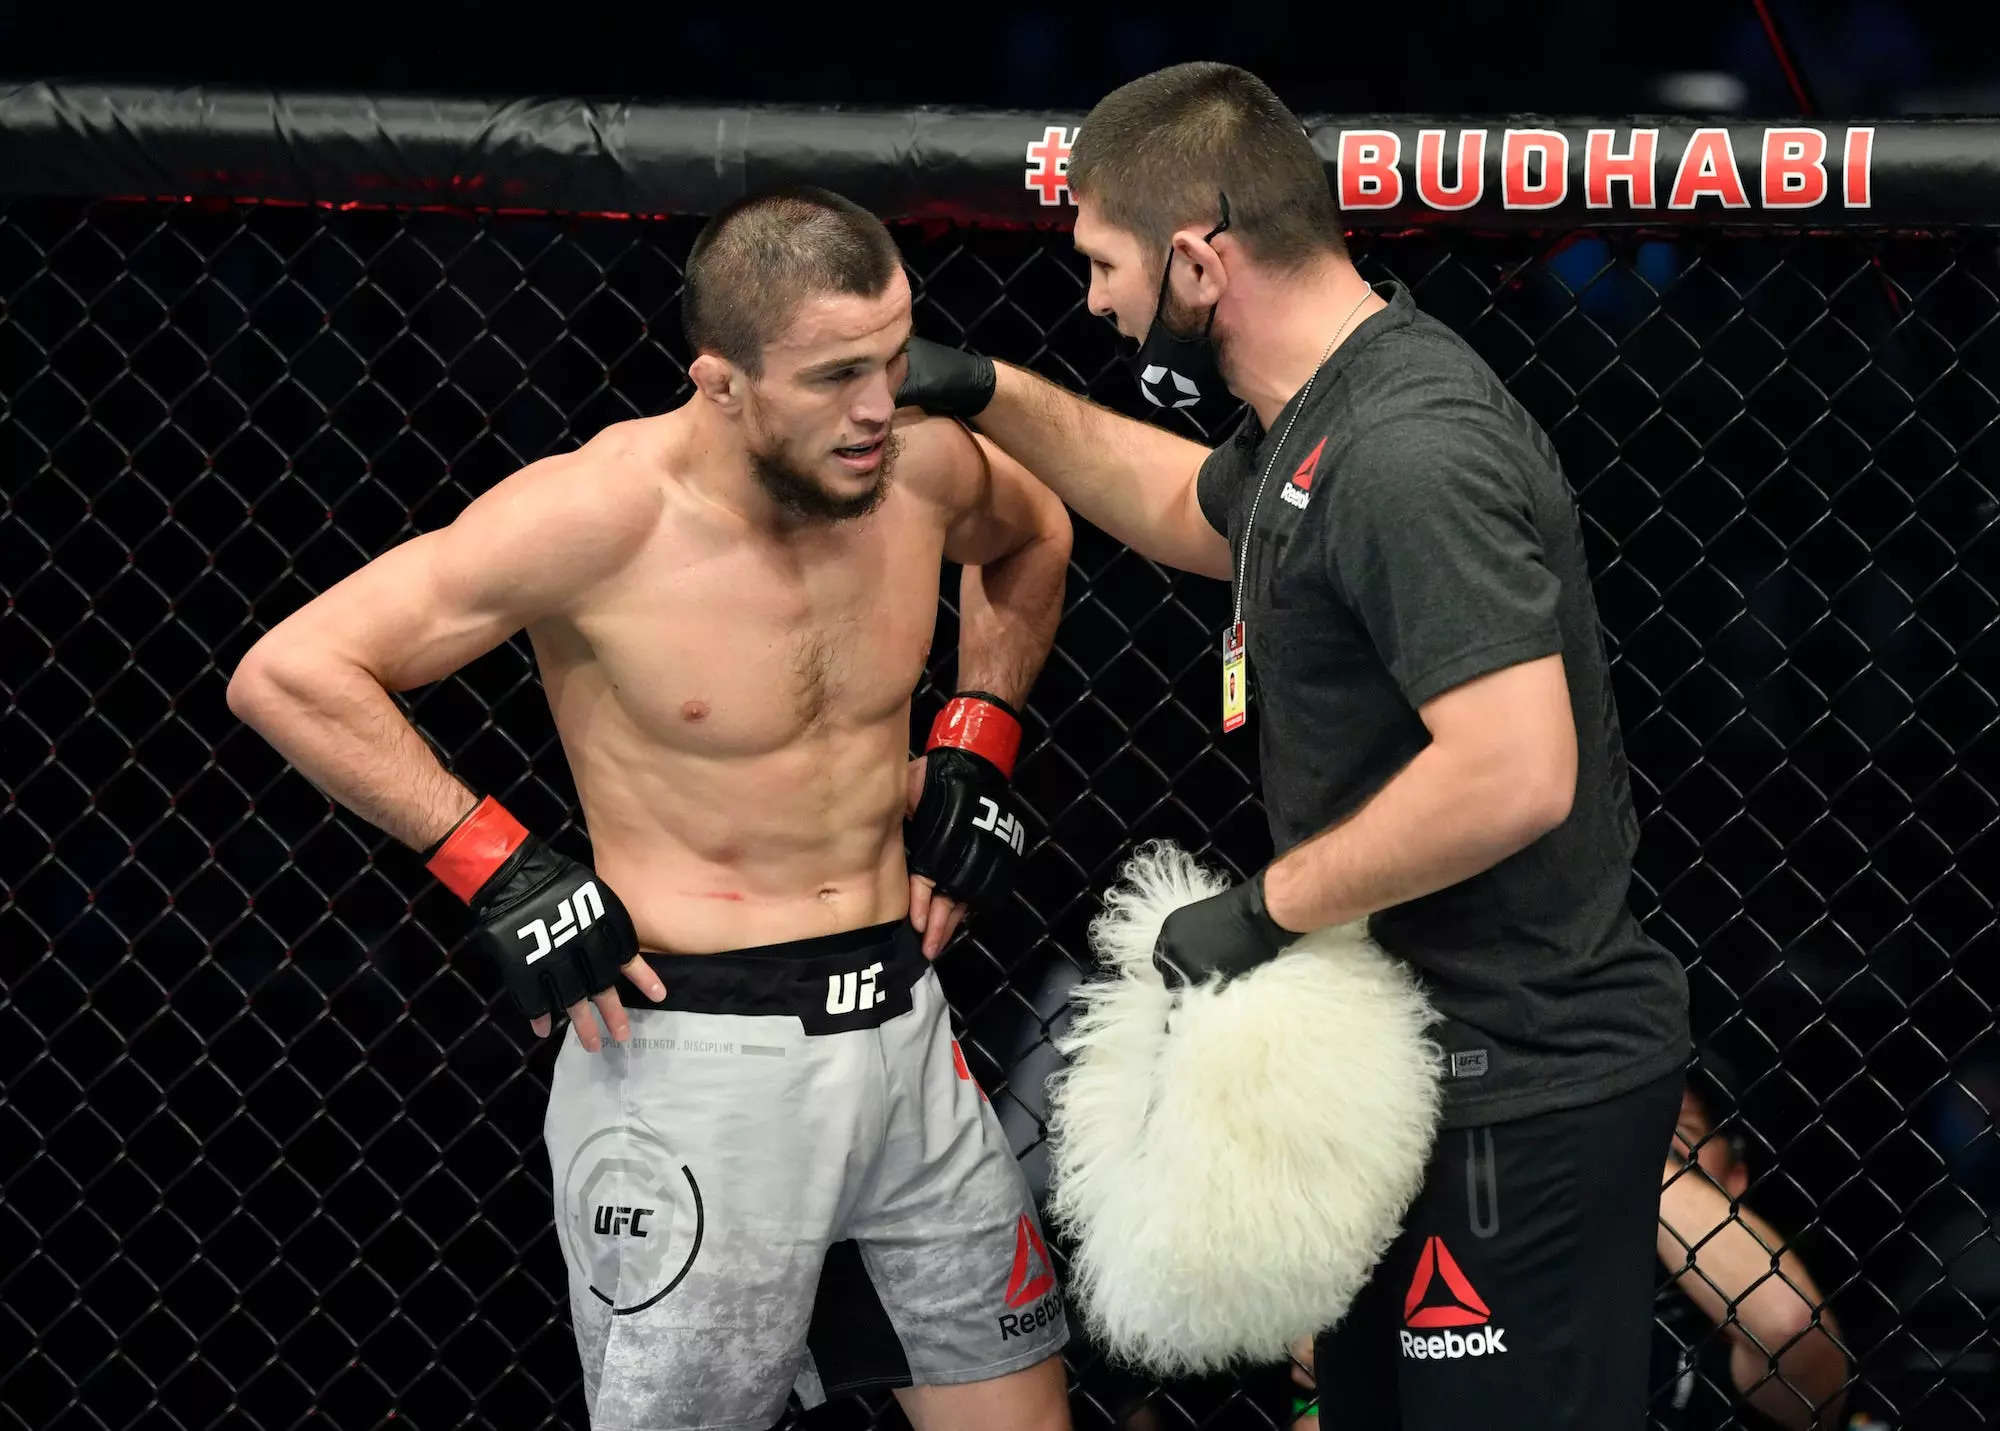 There's one scenario that could entice Khabib Nurmagomedov back to MMA, according to a UFC analyst